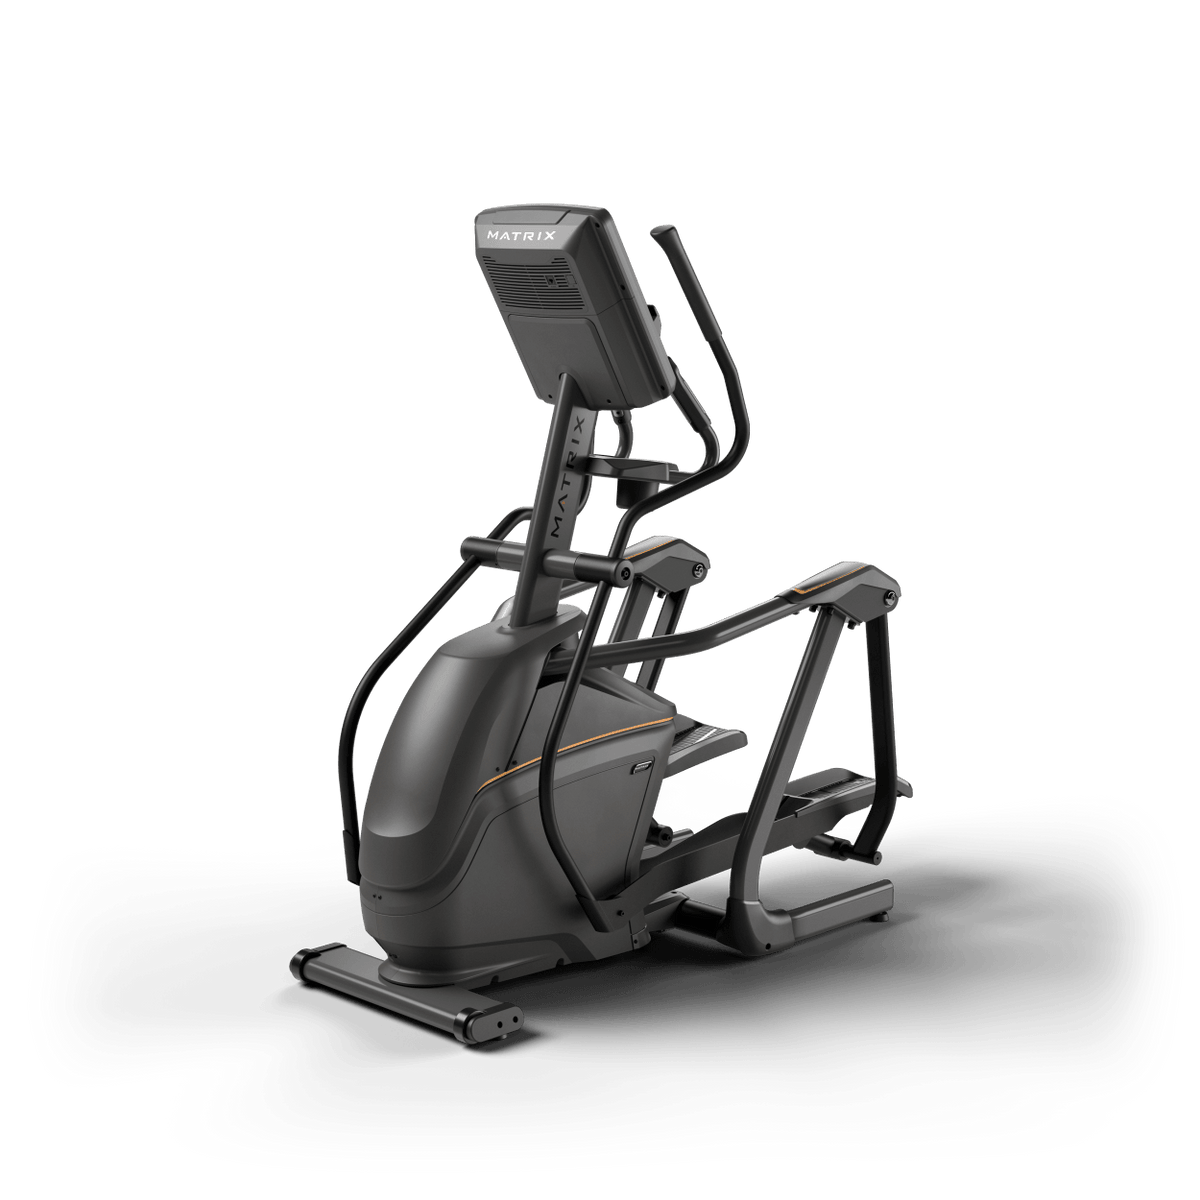 Matrix Fitness Lifestyle Elliptical with LED Console rear view | Fitness Experience